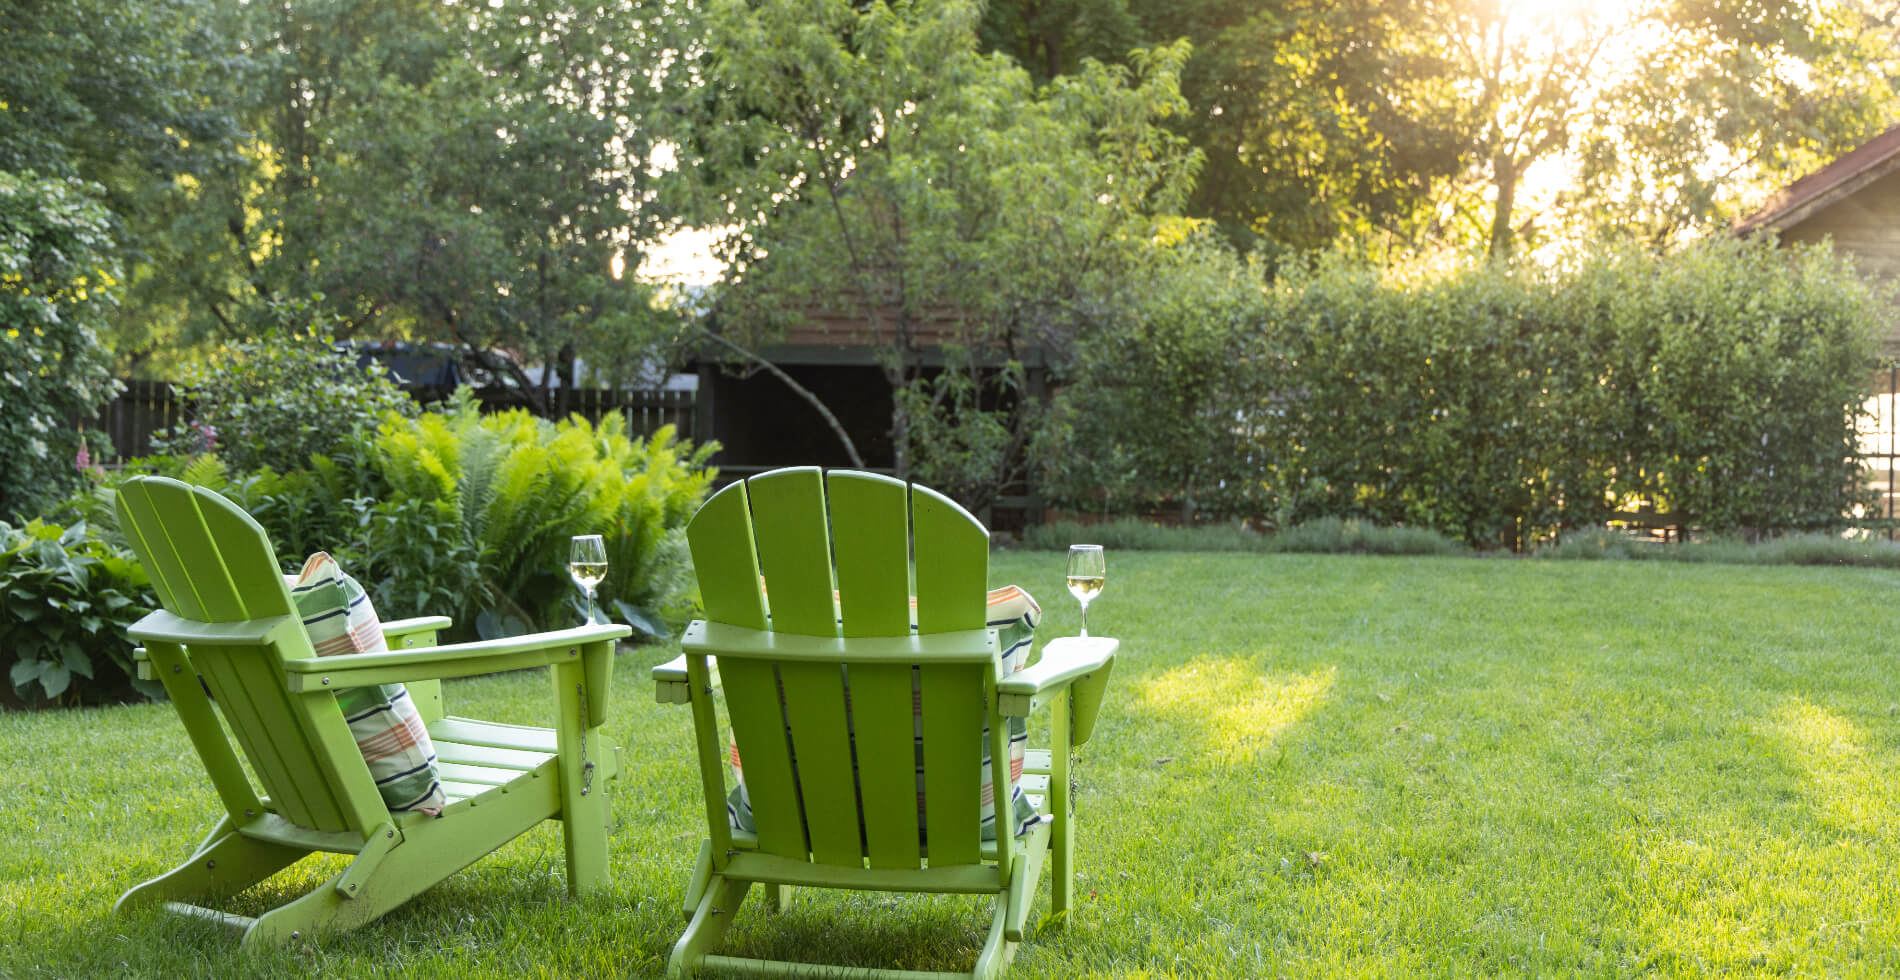 Two green adirondack chairs with glasses of white wine on the arms, set on a large grassy area looking over the lush gardens, bushes and trees.